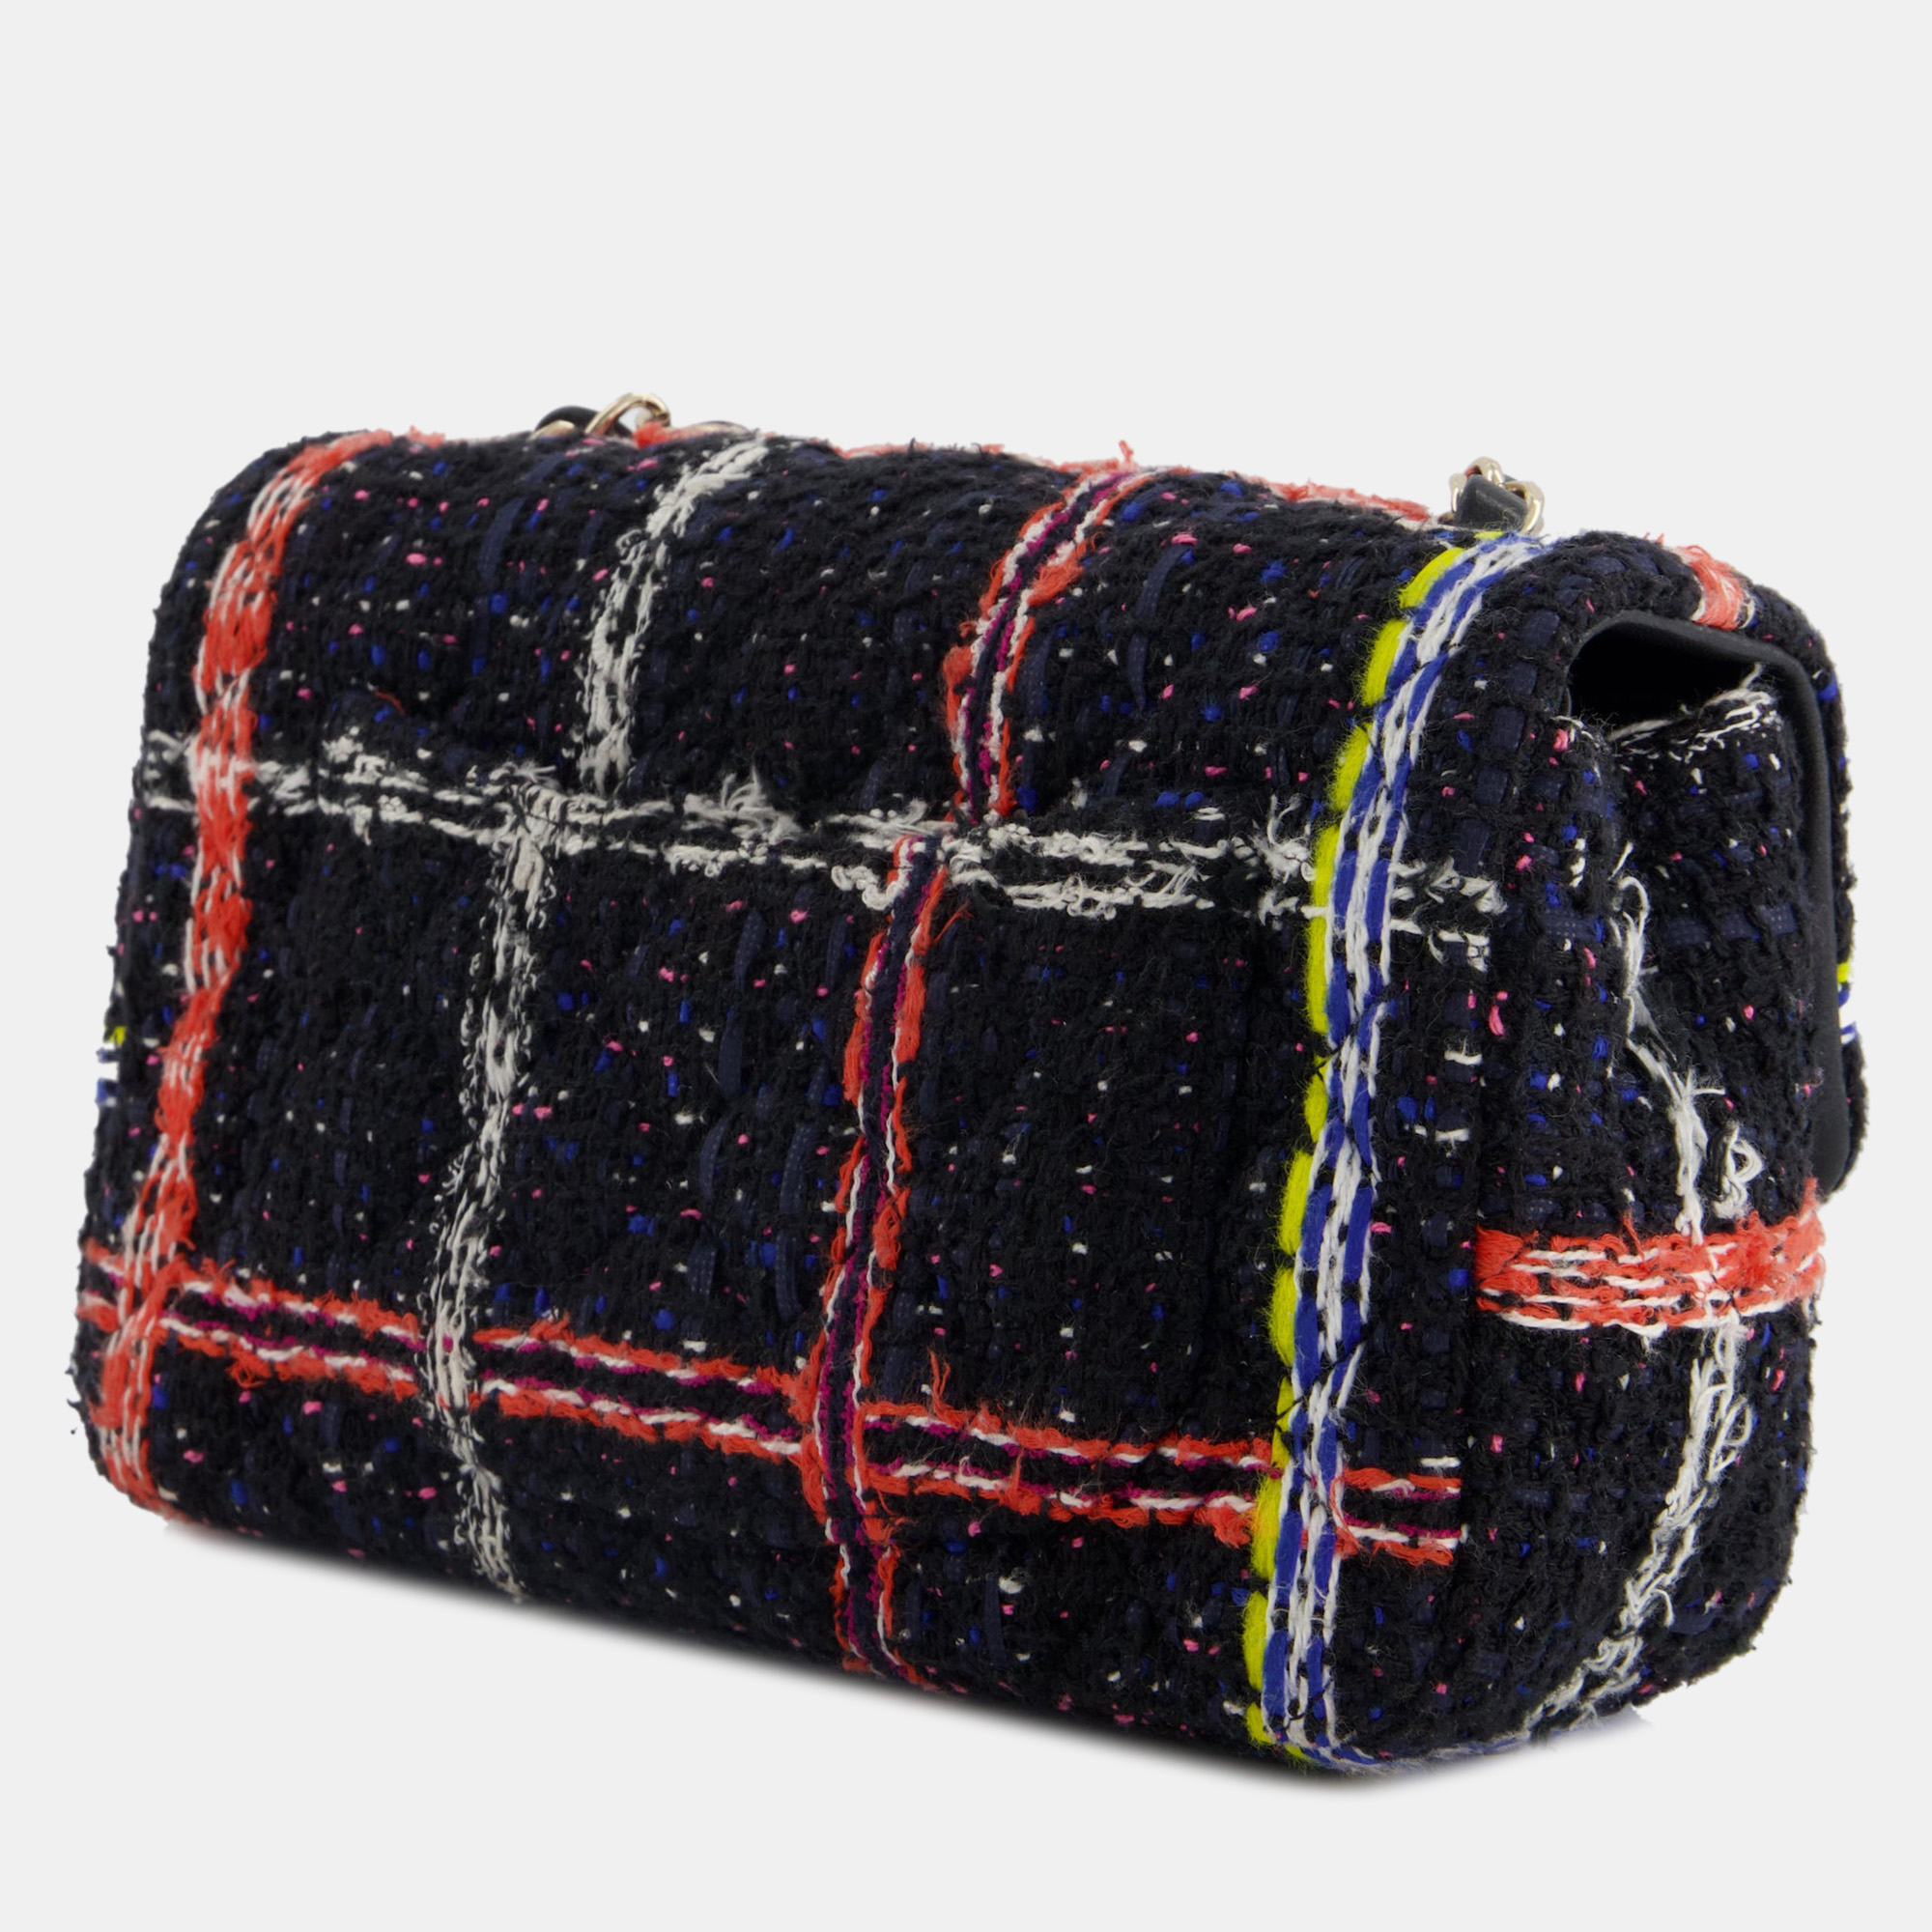 Chanel Black, Navy, Yellow And Blue Multi-Colour Check Tweed Mini Rectangular Bag With Champagne Gold Hardware